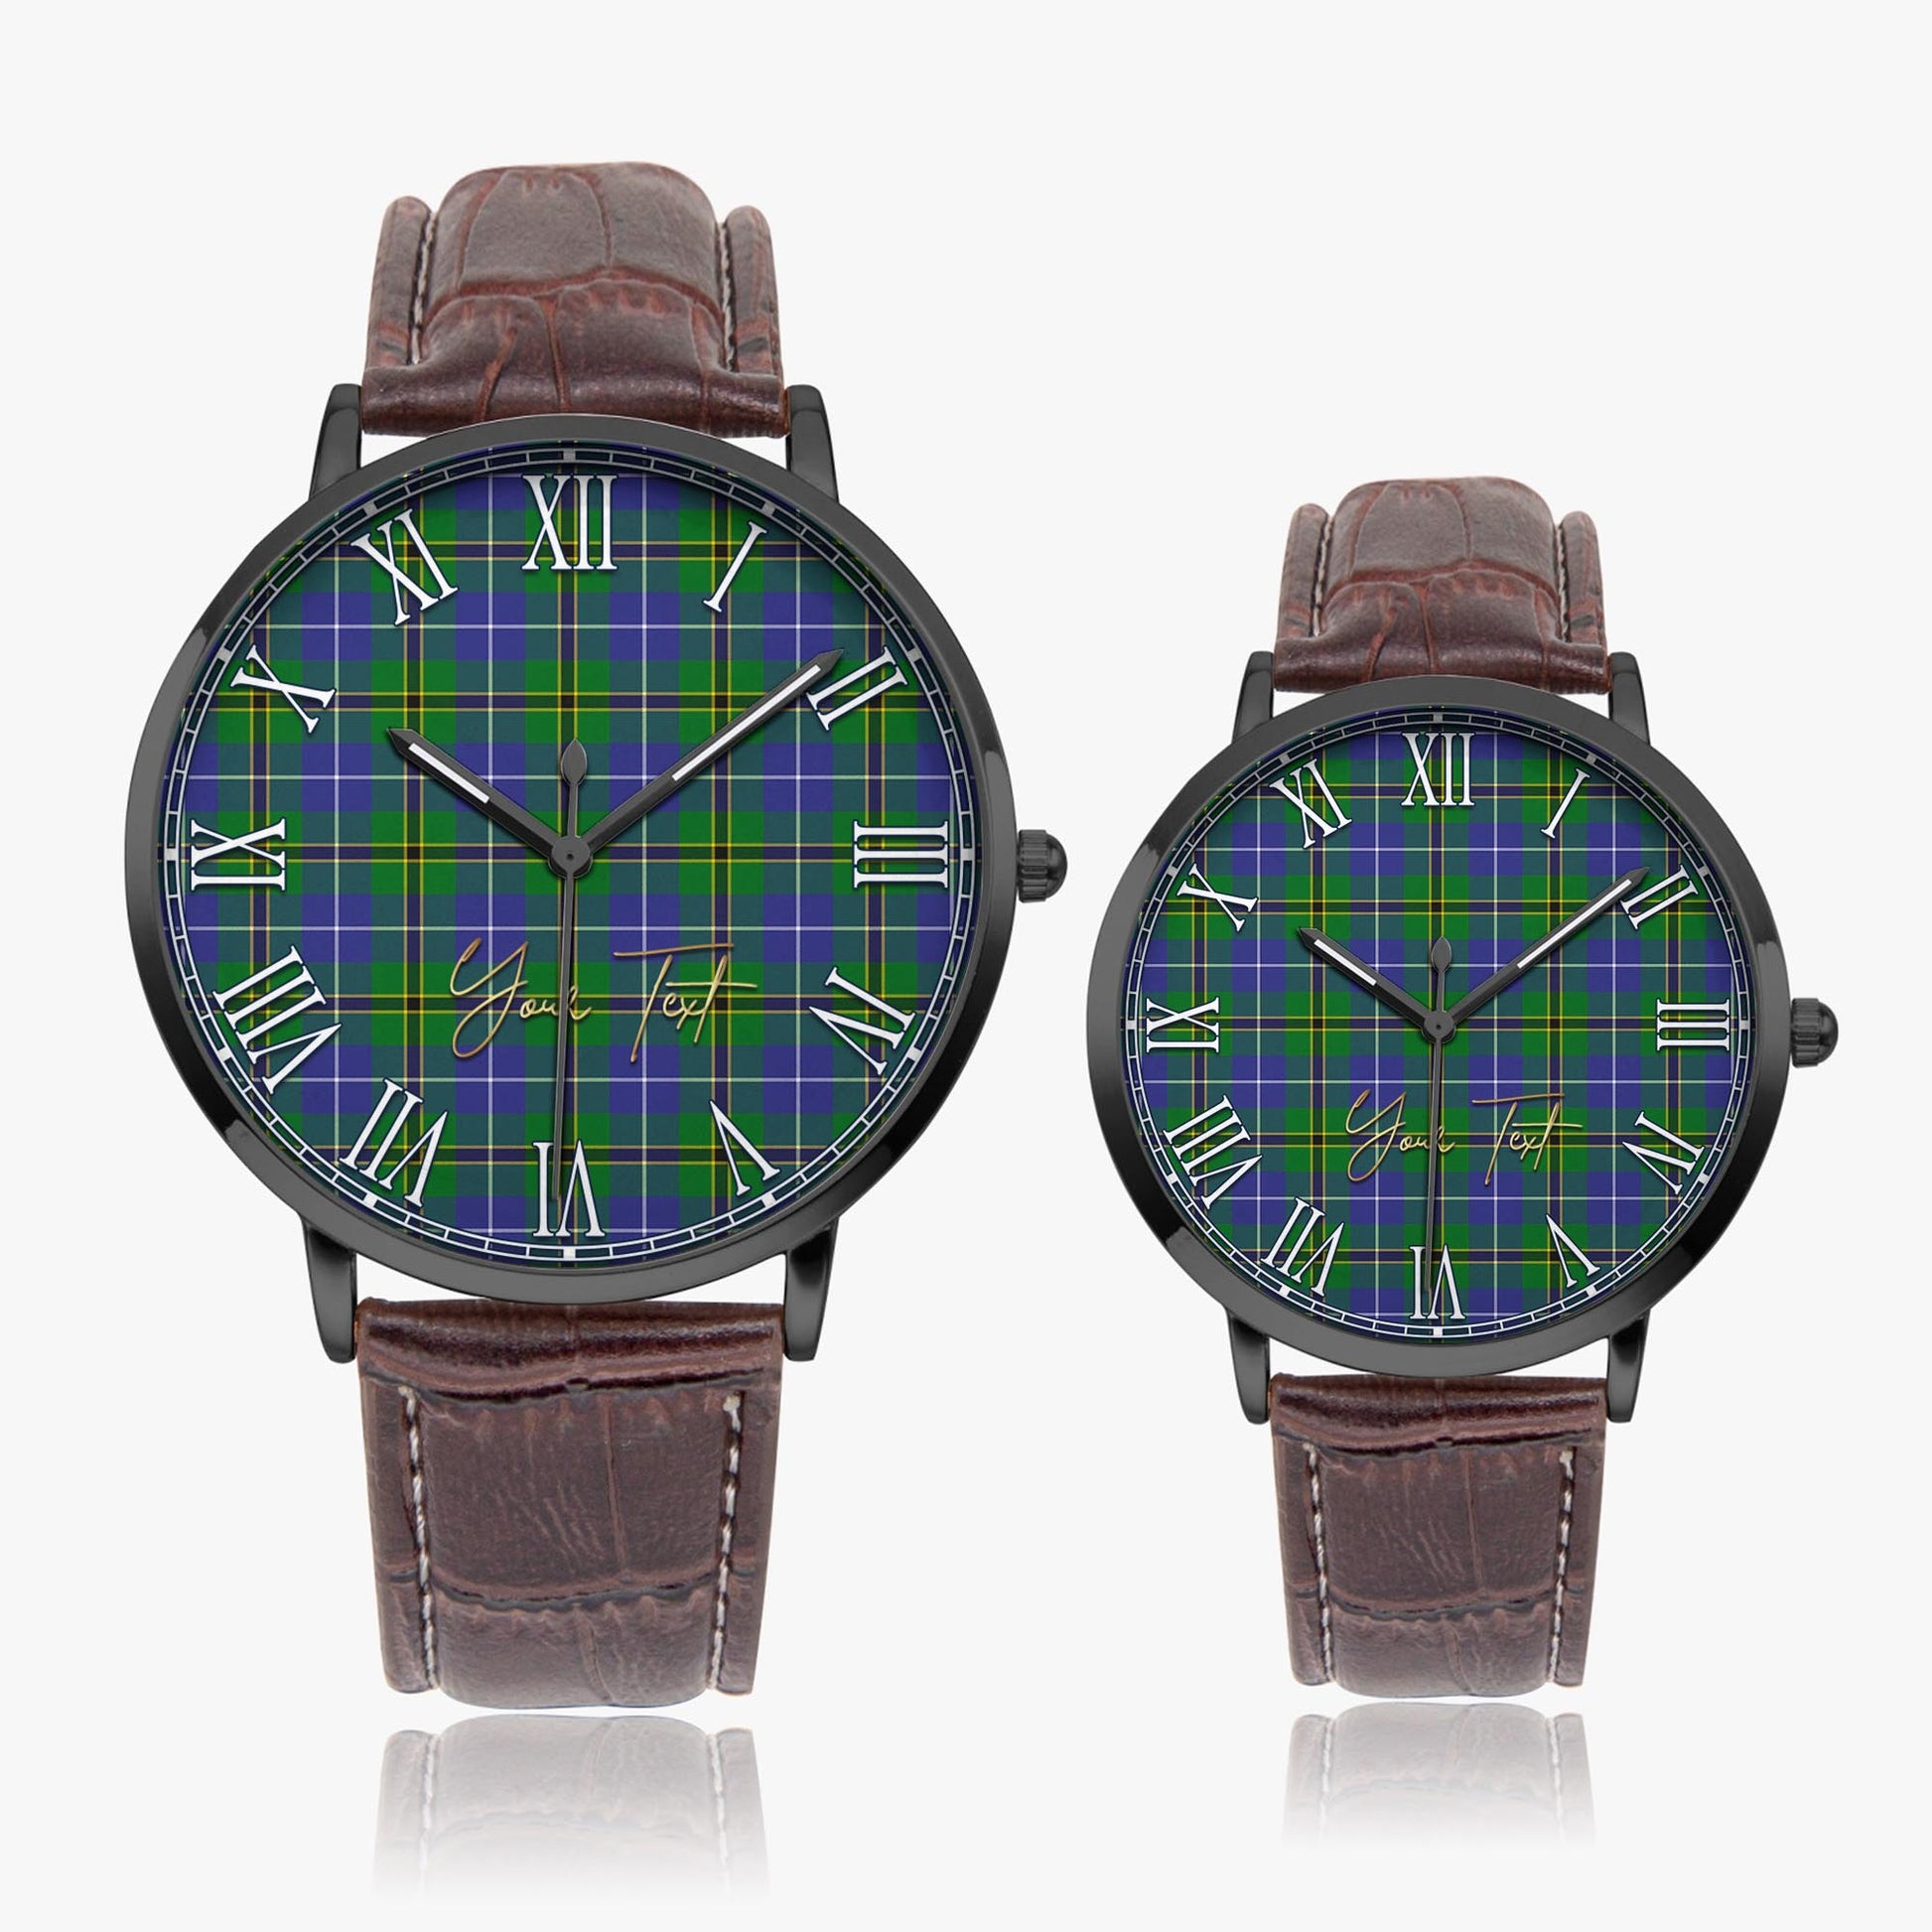 Turnbull Hunting Tartan Personalized Your Text Leather Trap Quartz Watch Ultra Thin Black Case With Brown Leather Strap - Tartanvibesclothing Shop